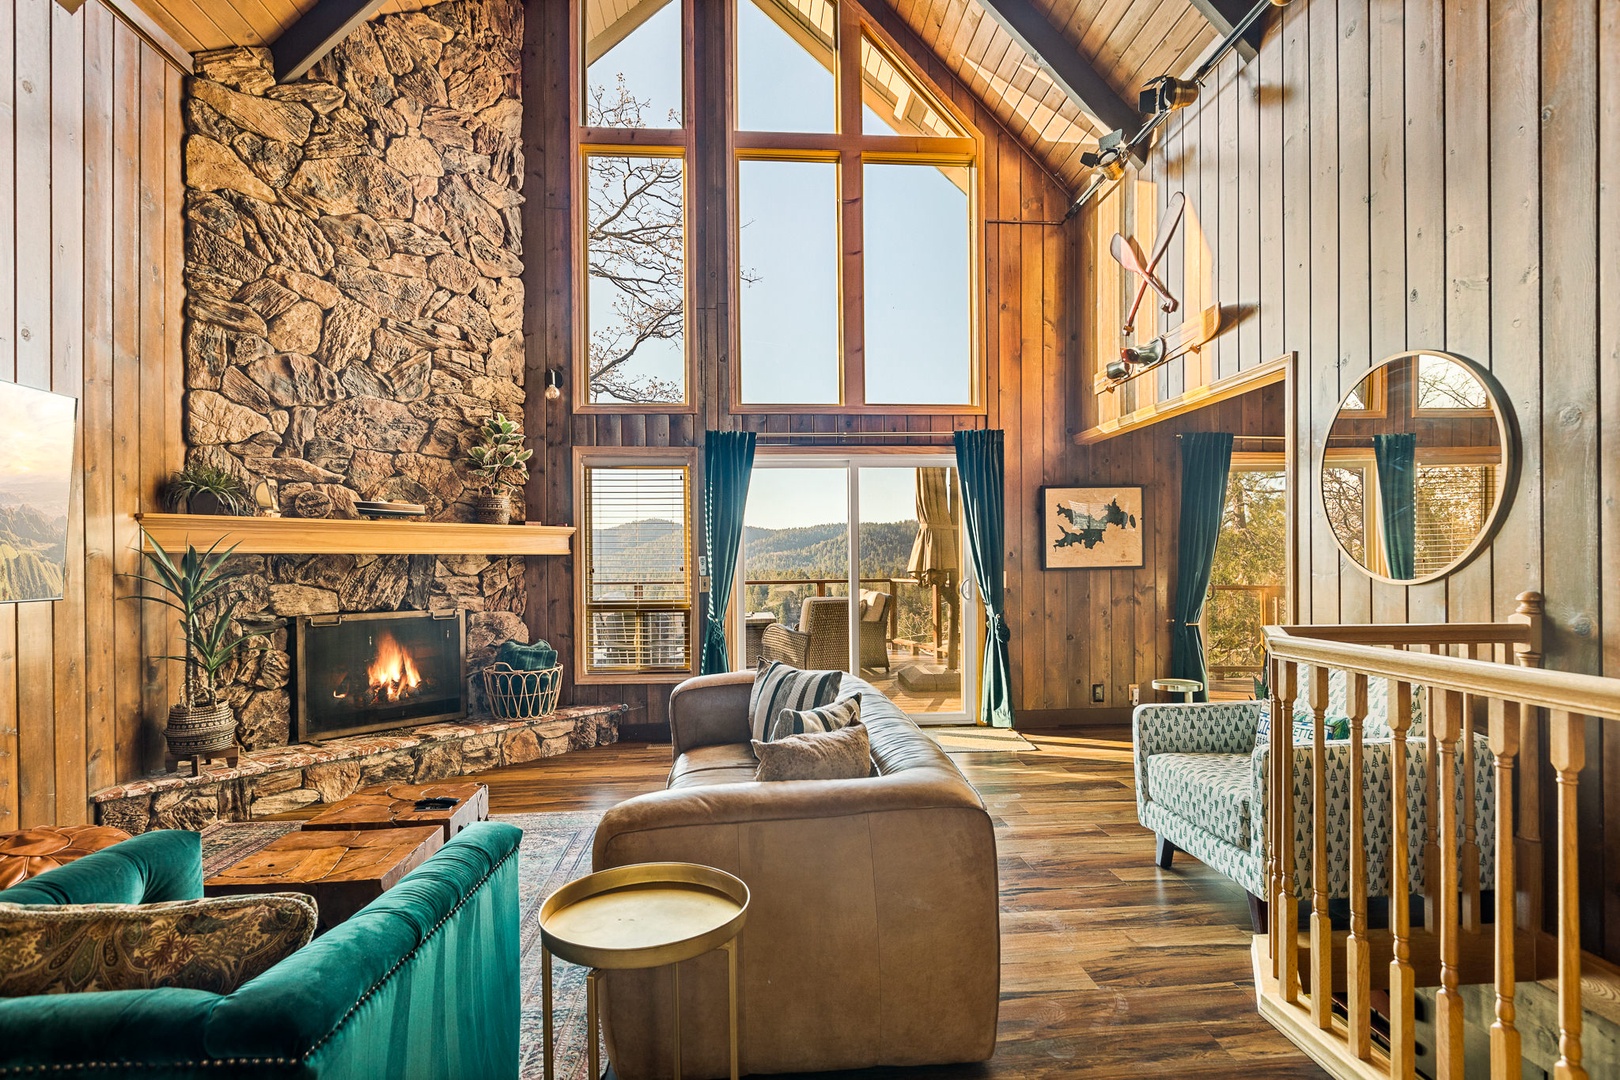 Stream your favorite entertainment by the gas fireplace without losing those gorgeous views of Lake Arrowhead